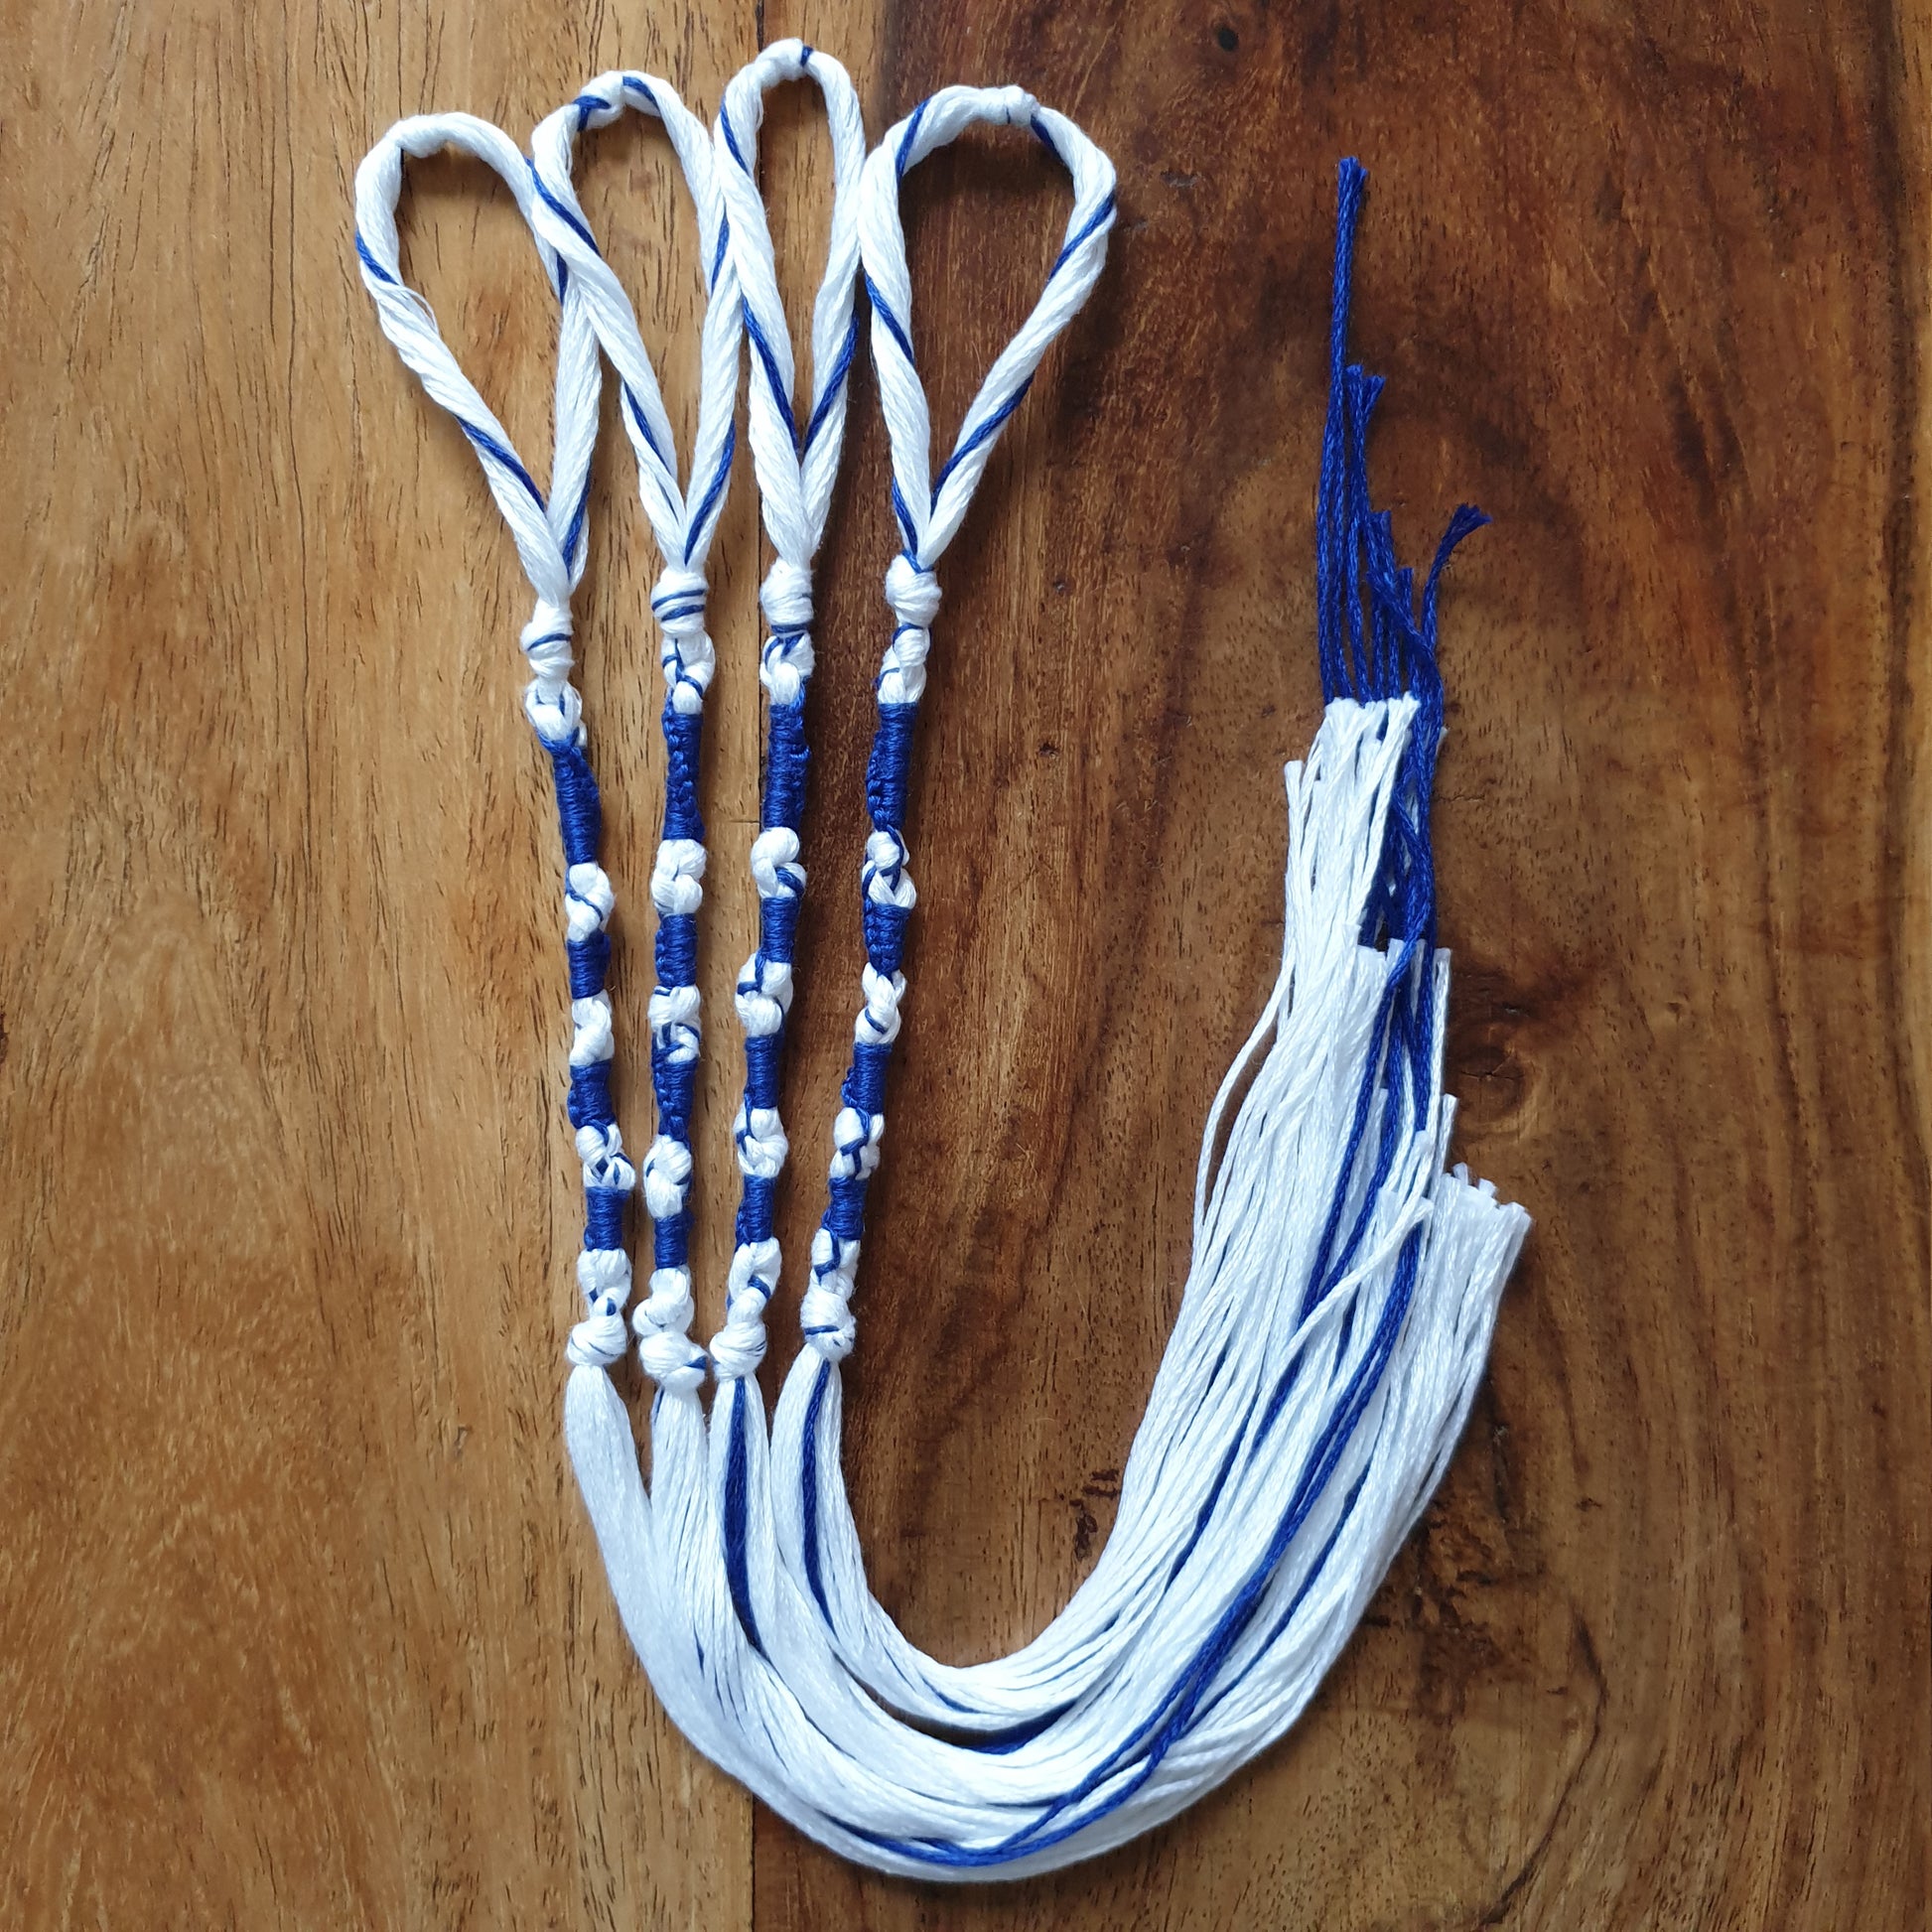 Tzitzit set of 4 - White & Blue, Knotted YHWH (10-5-6-5), Traditional  Tassels, Torah Fringe | FREE DELIVERY